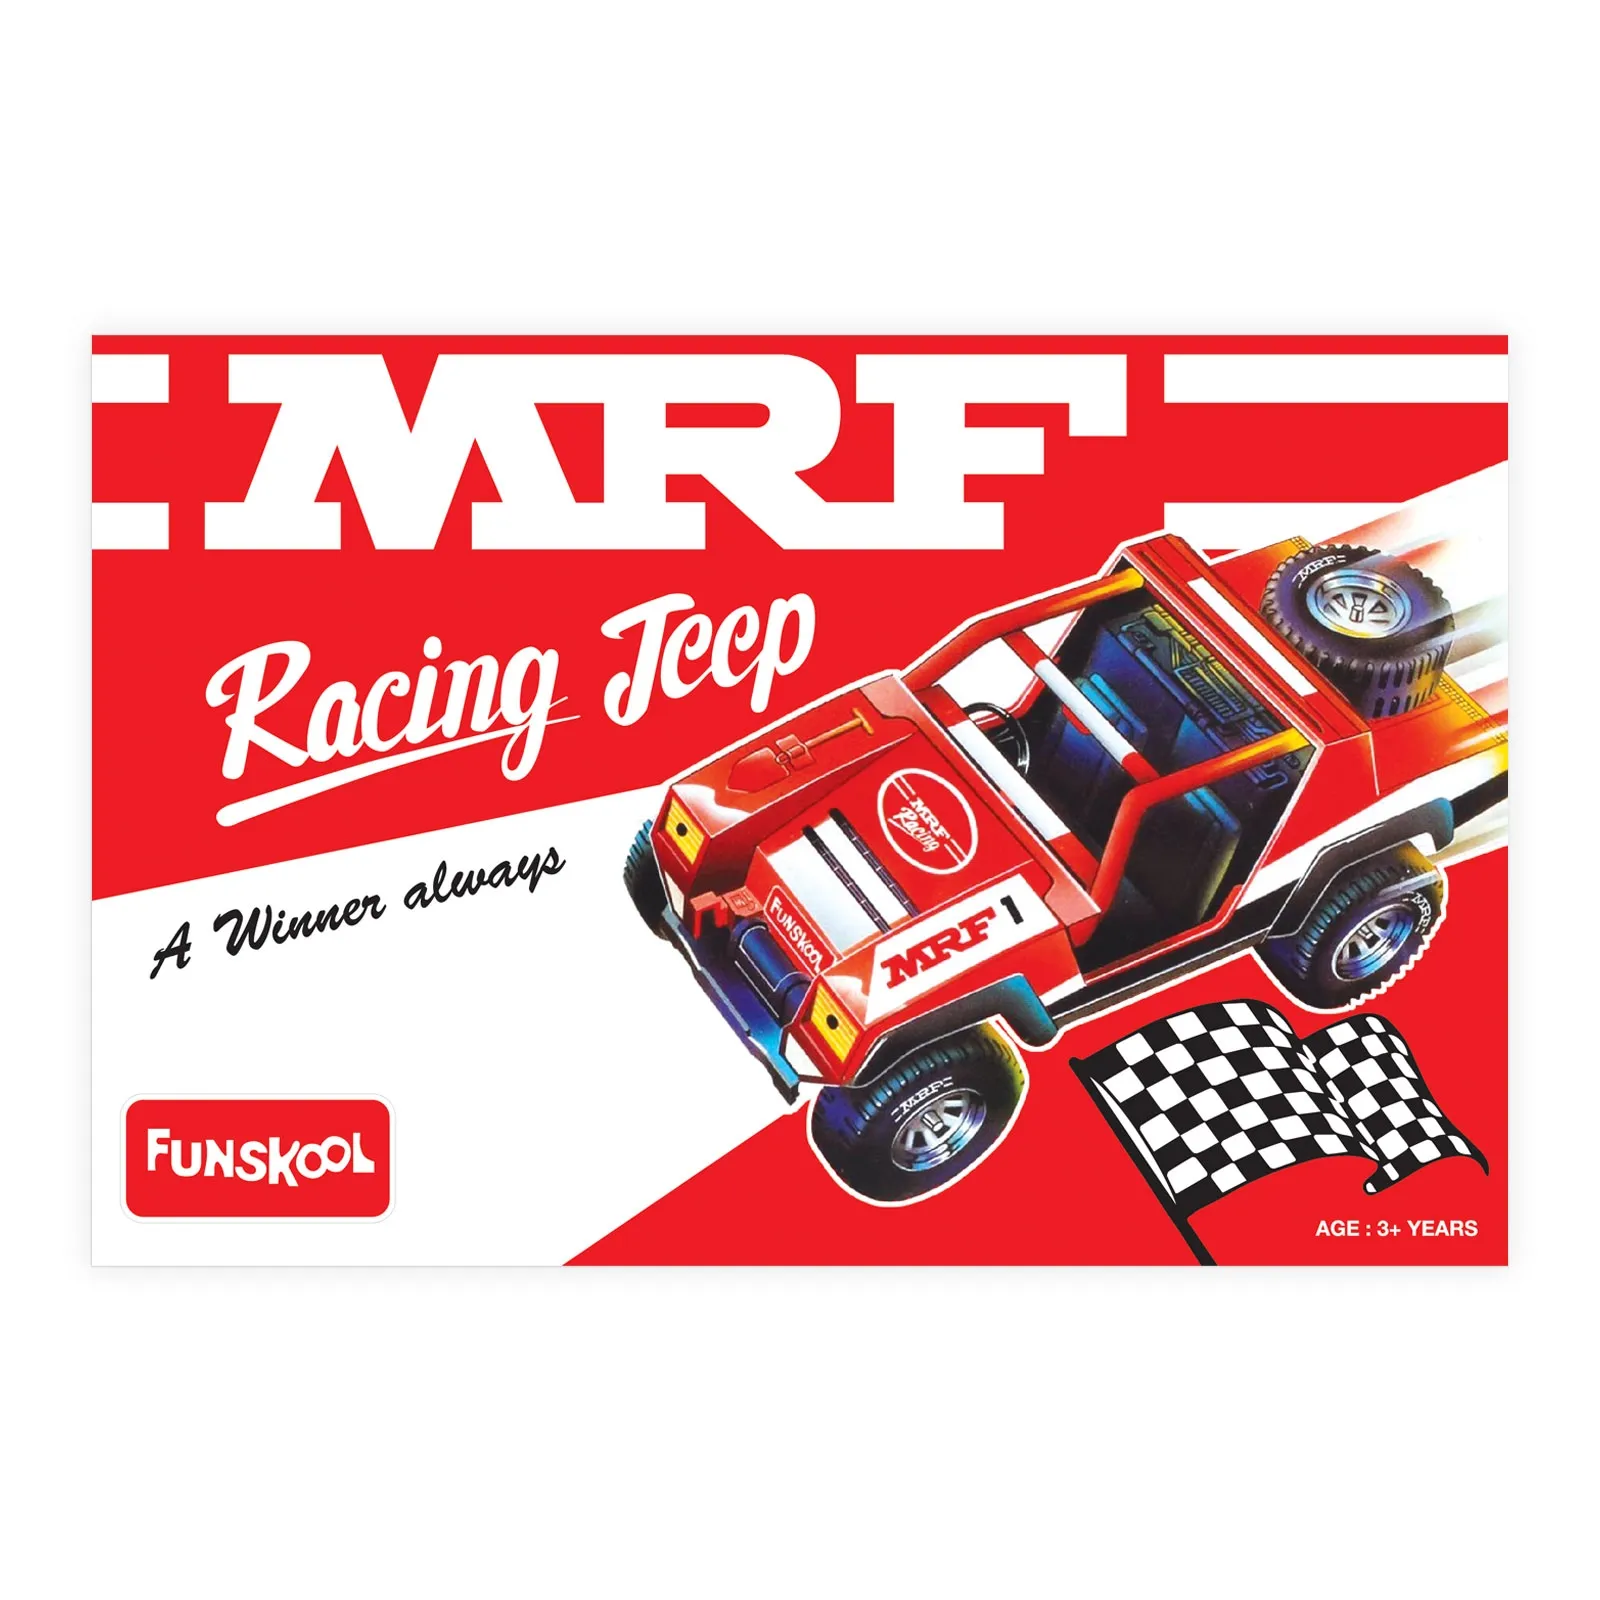 Funskool MRF Racing Jeep Red Colour Ready to Race